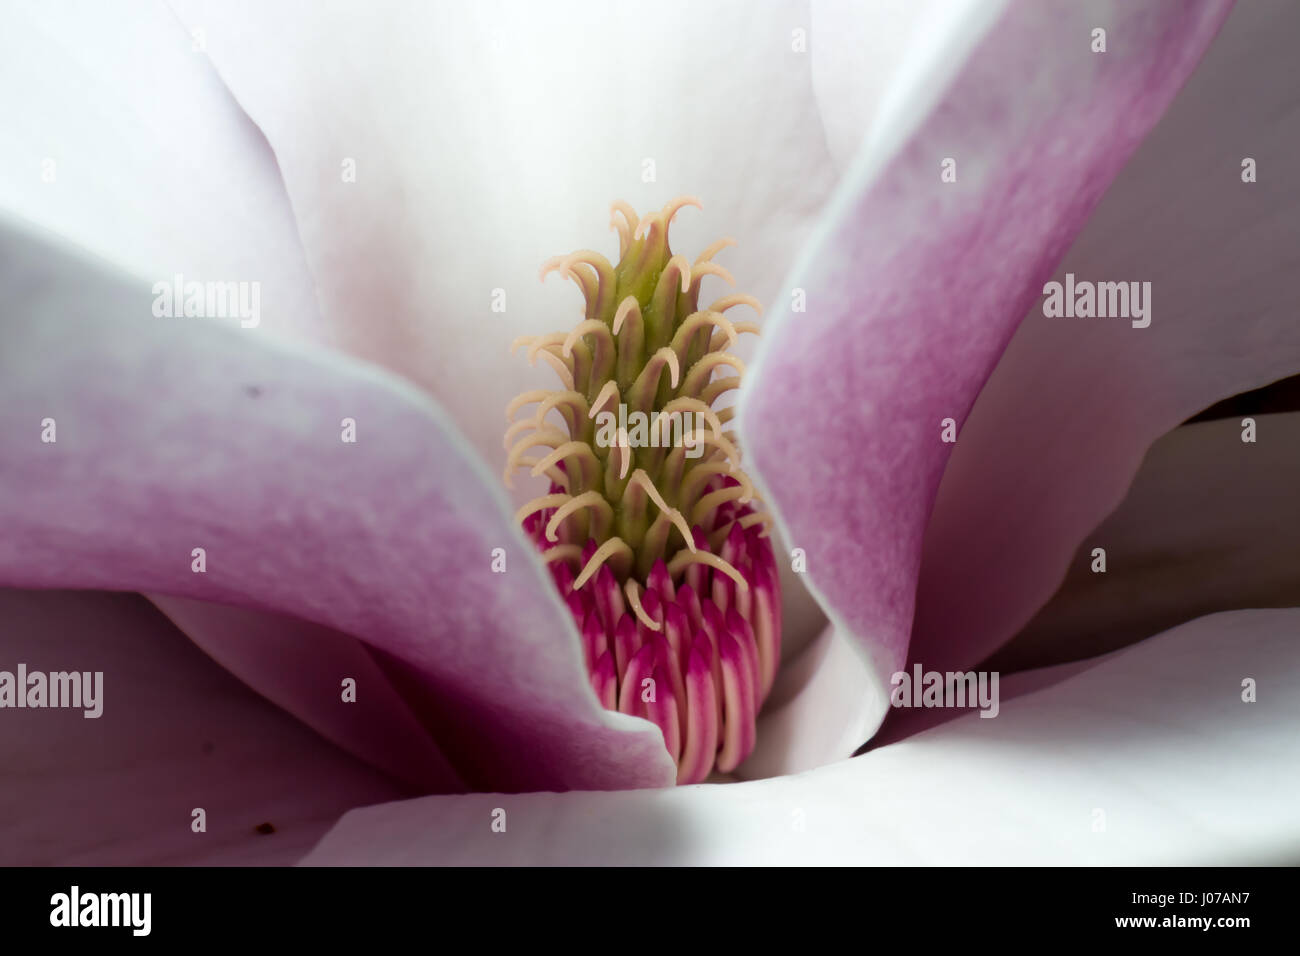 White and pink bloomed magnolia flower in the spring season. Macro photography of the magnolia blossom. Stock Photo